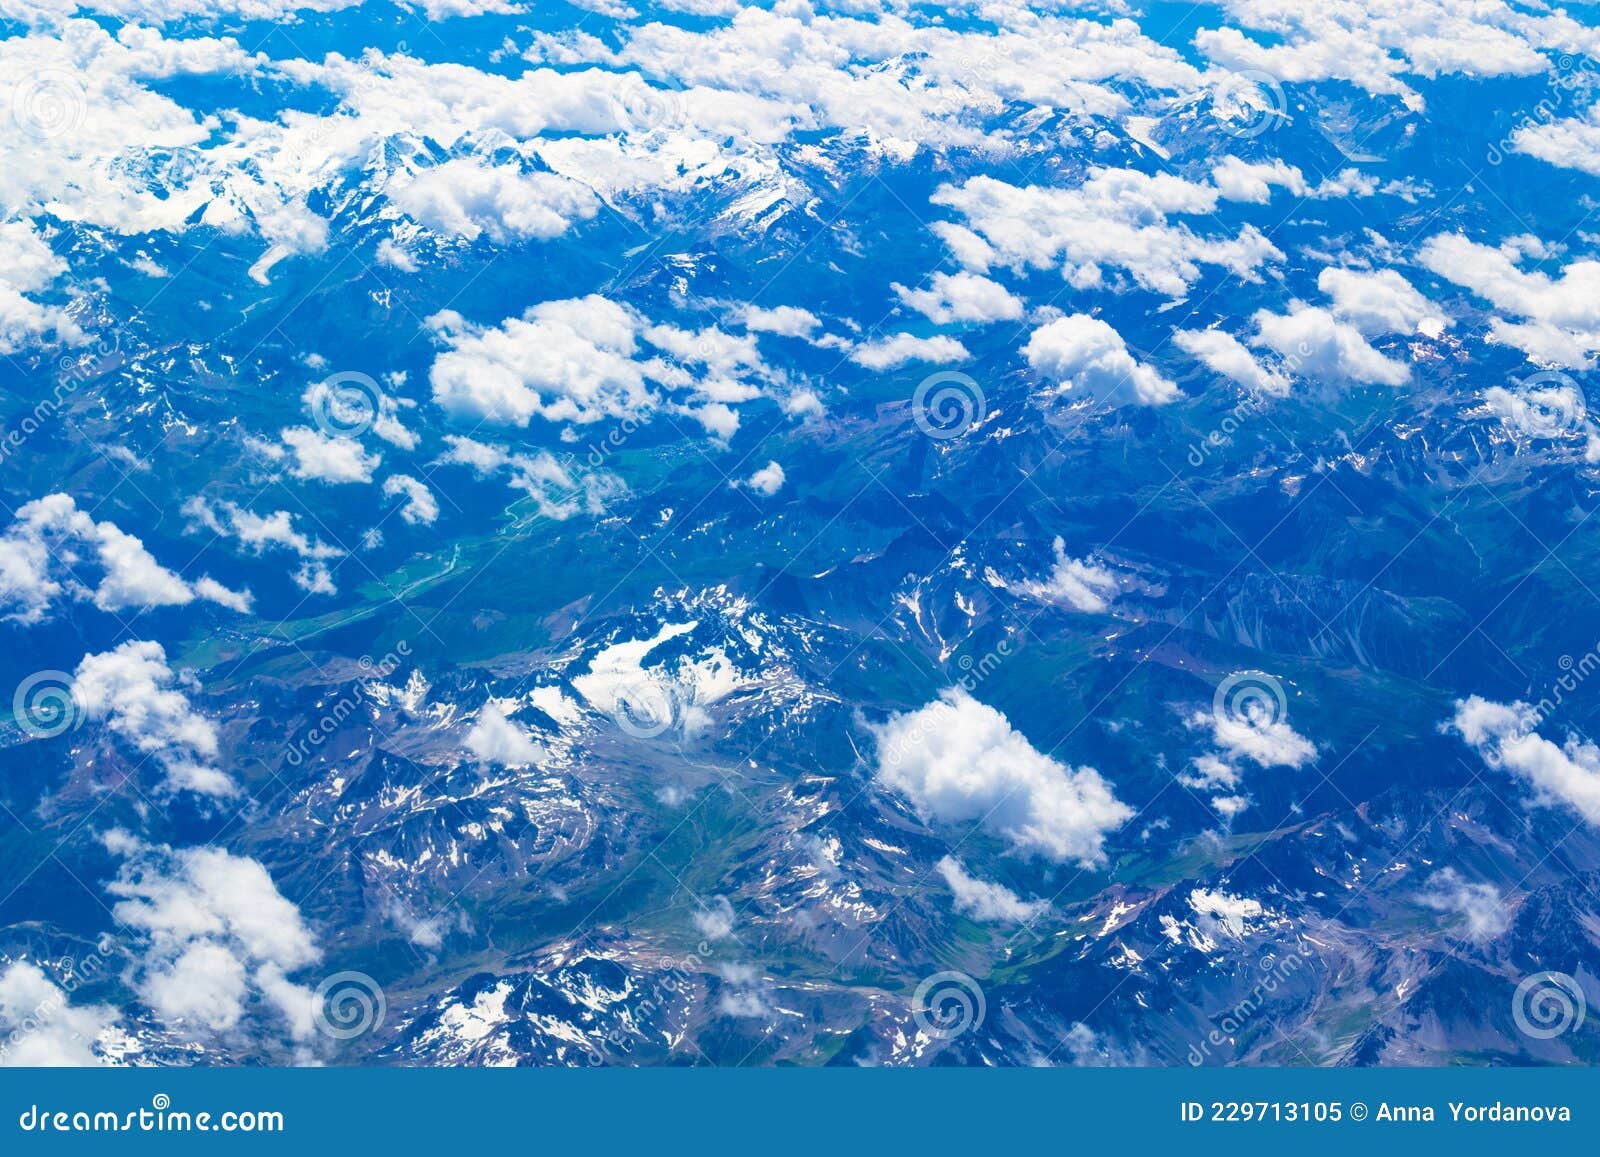 aerial scenic view of the alps italy and switzerland